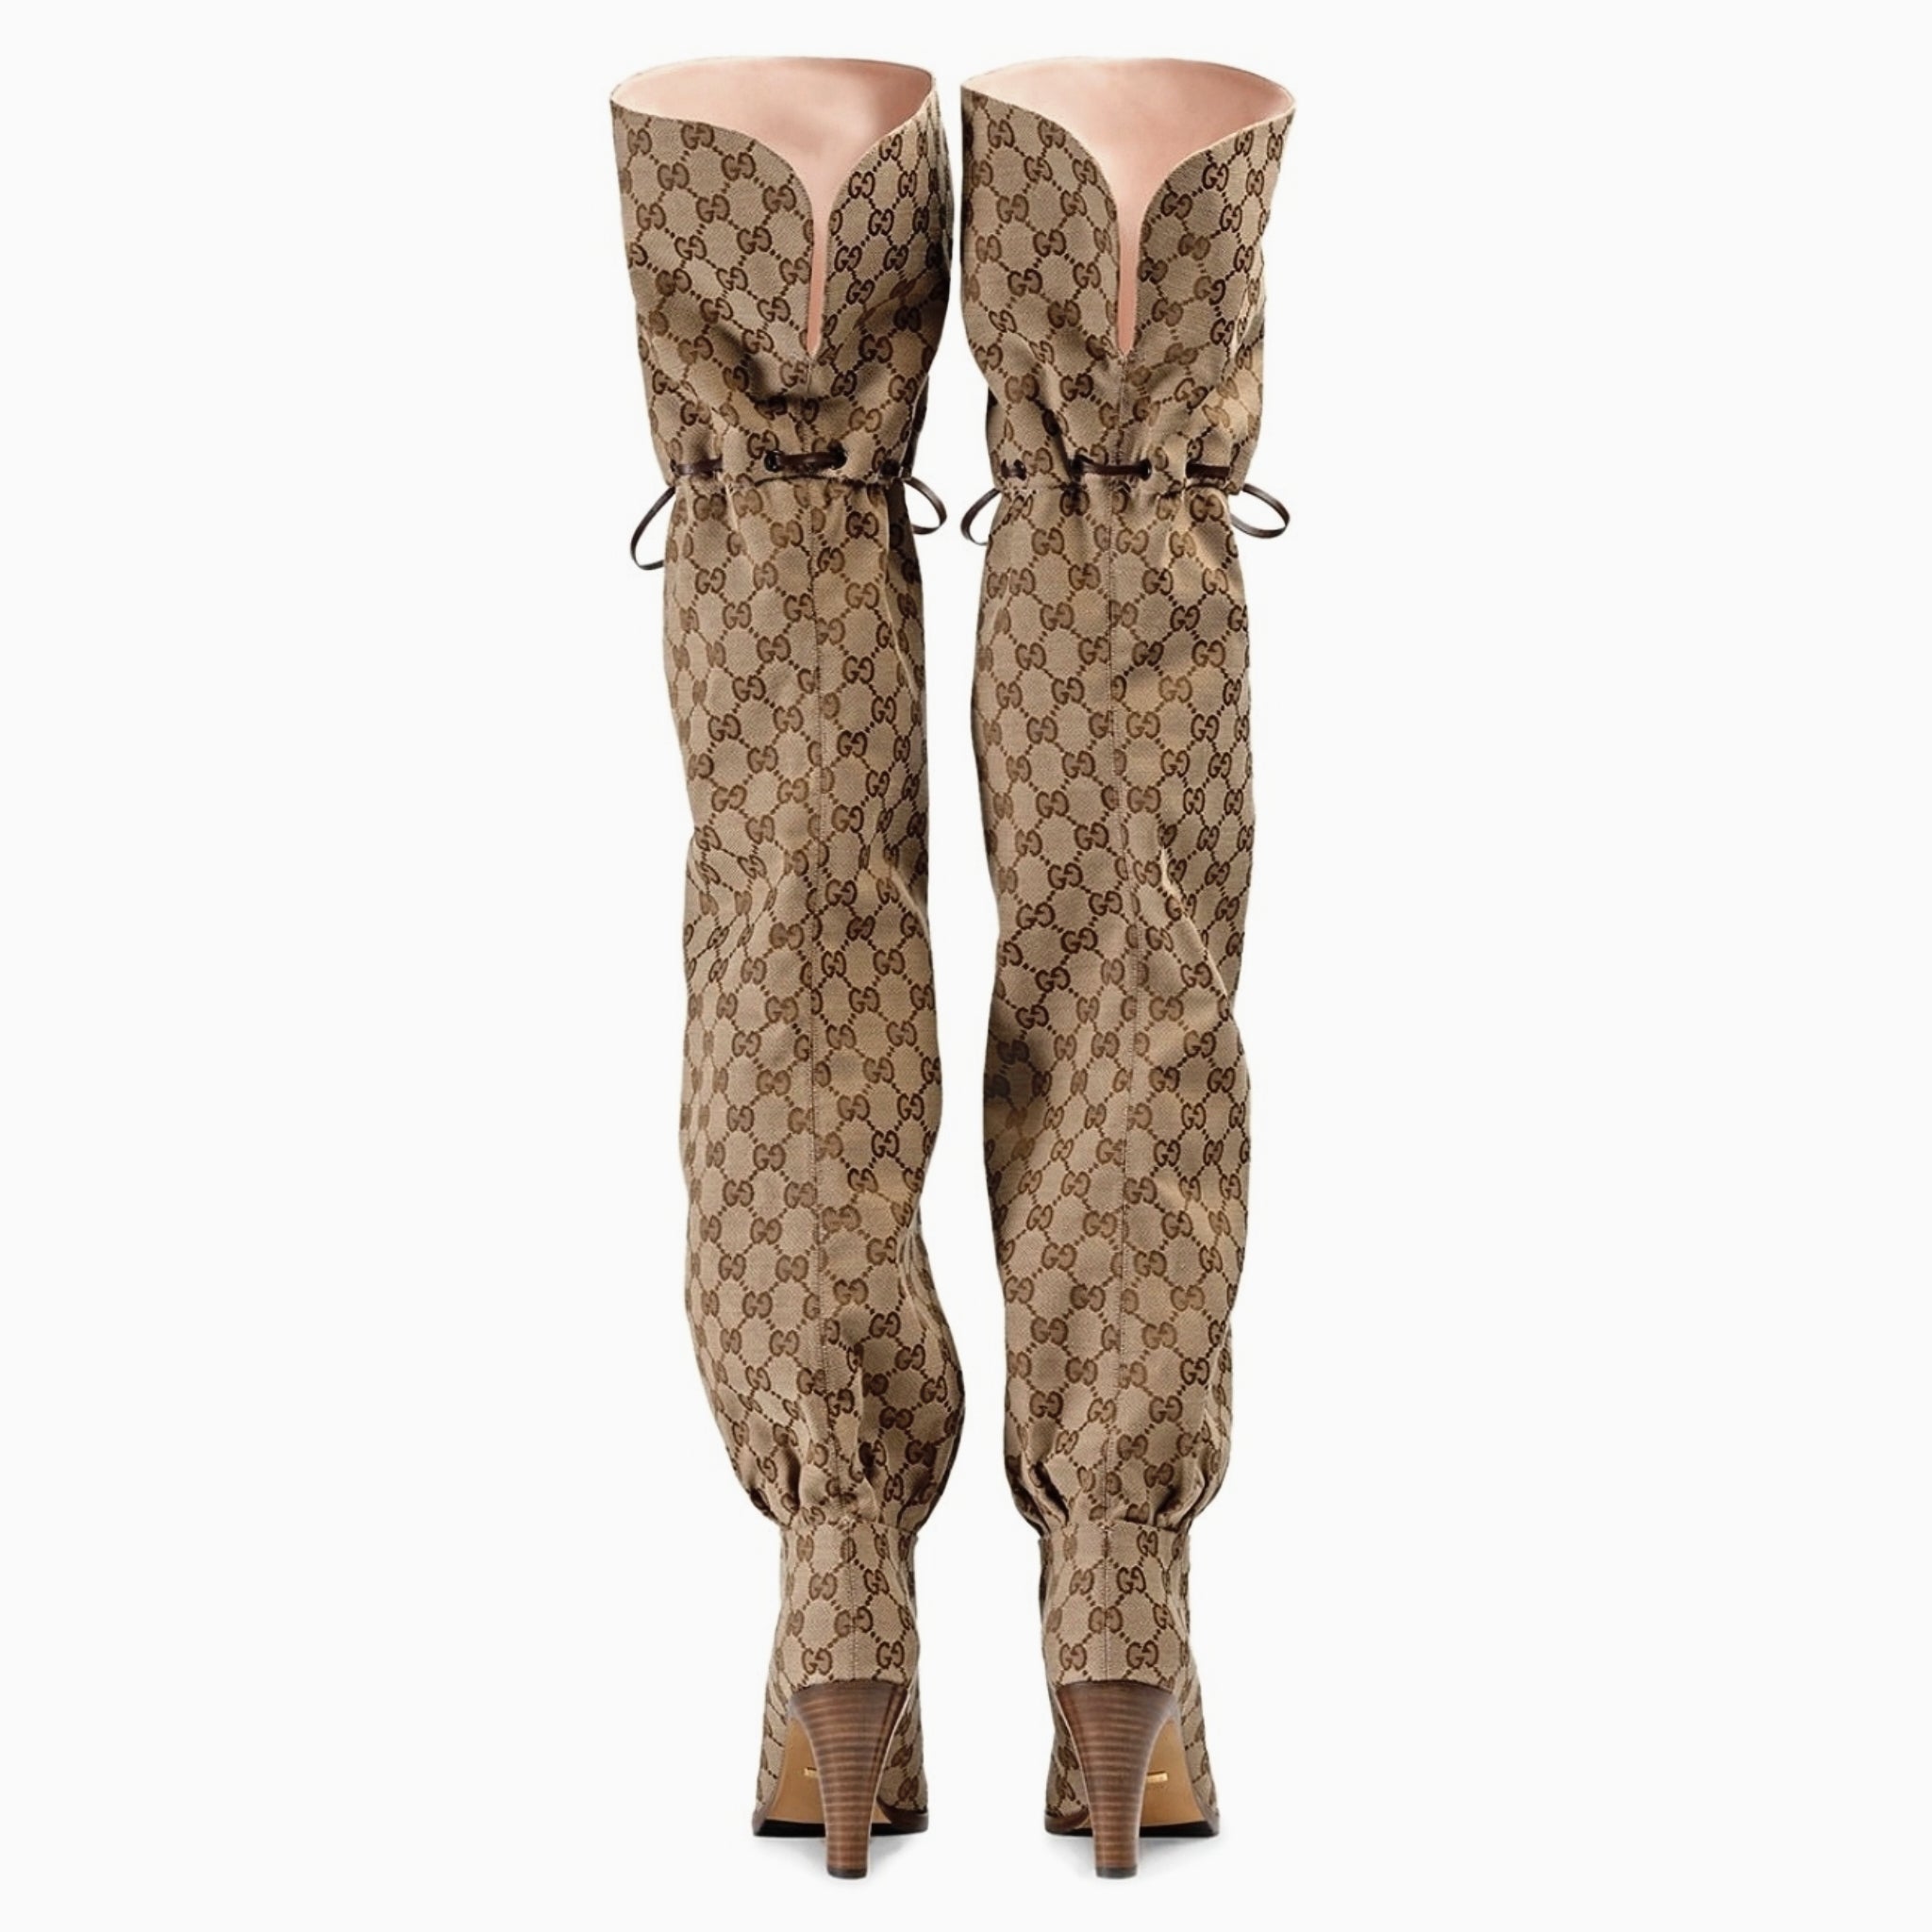 Gucci Monogram Over the Knee Boots - dress. Raleigh